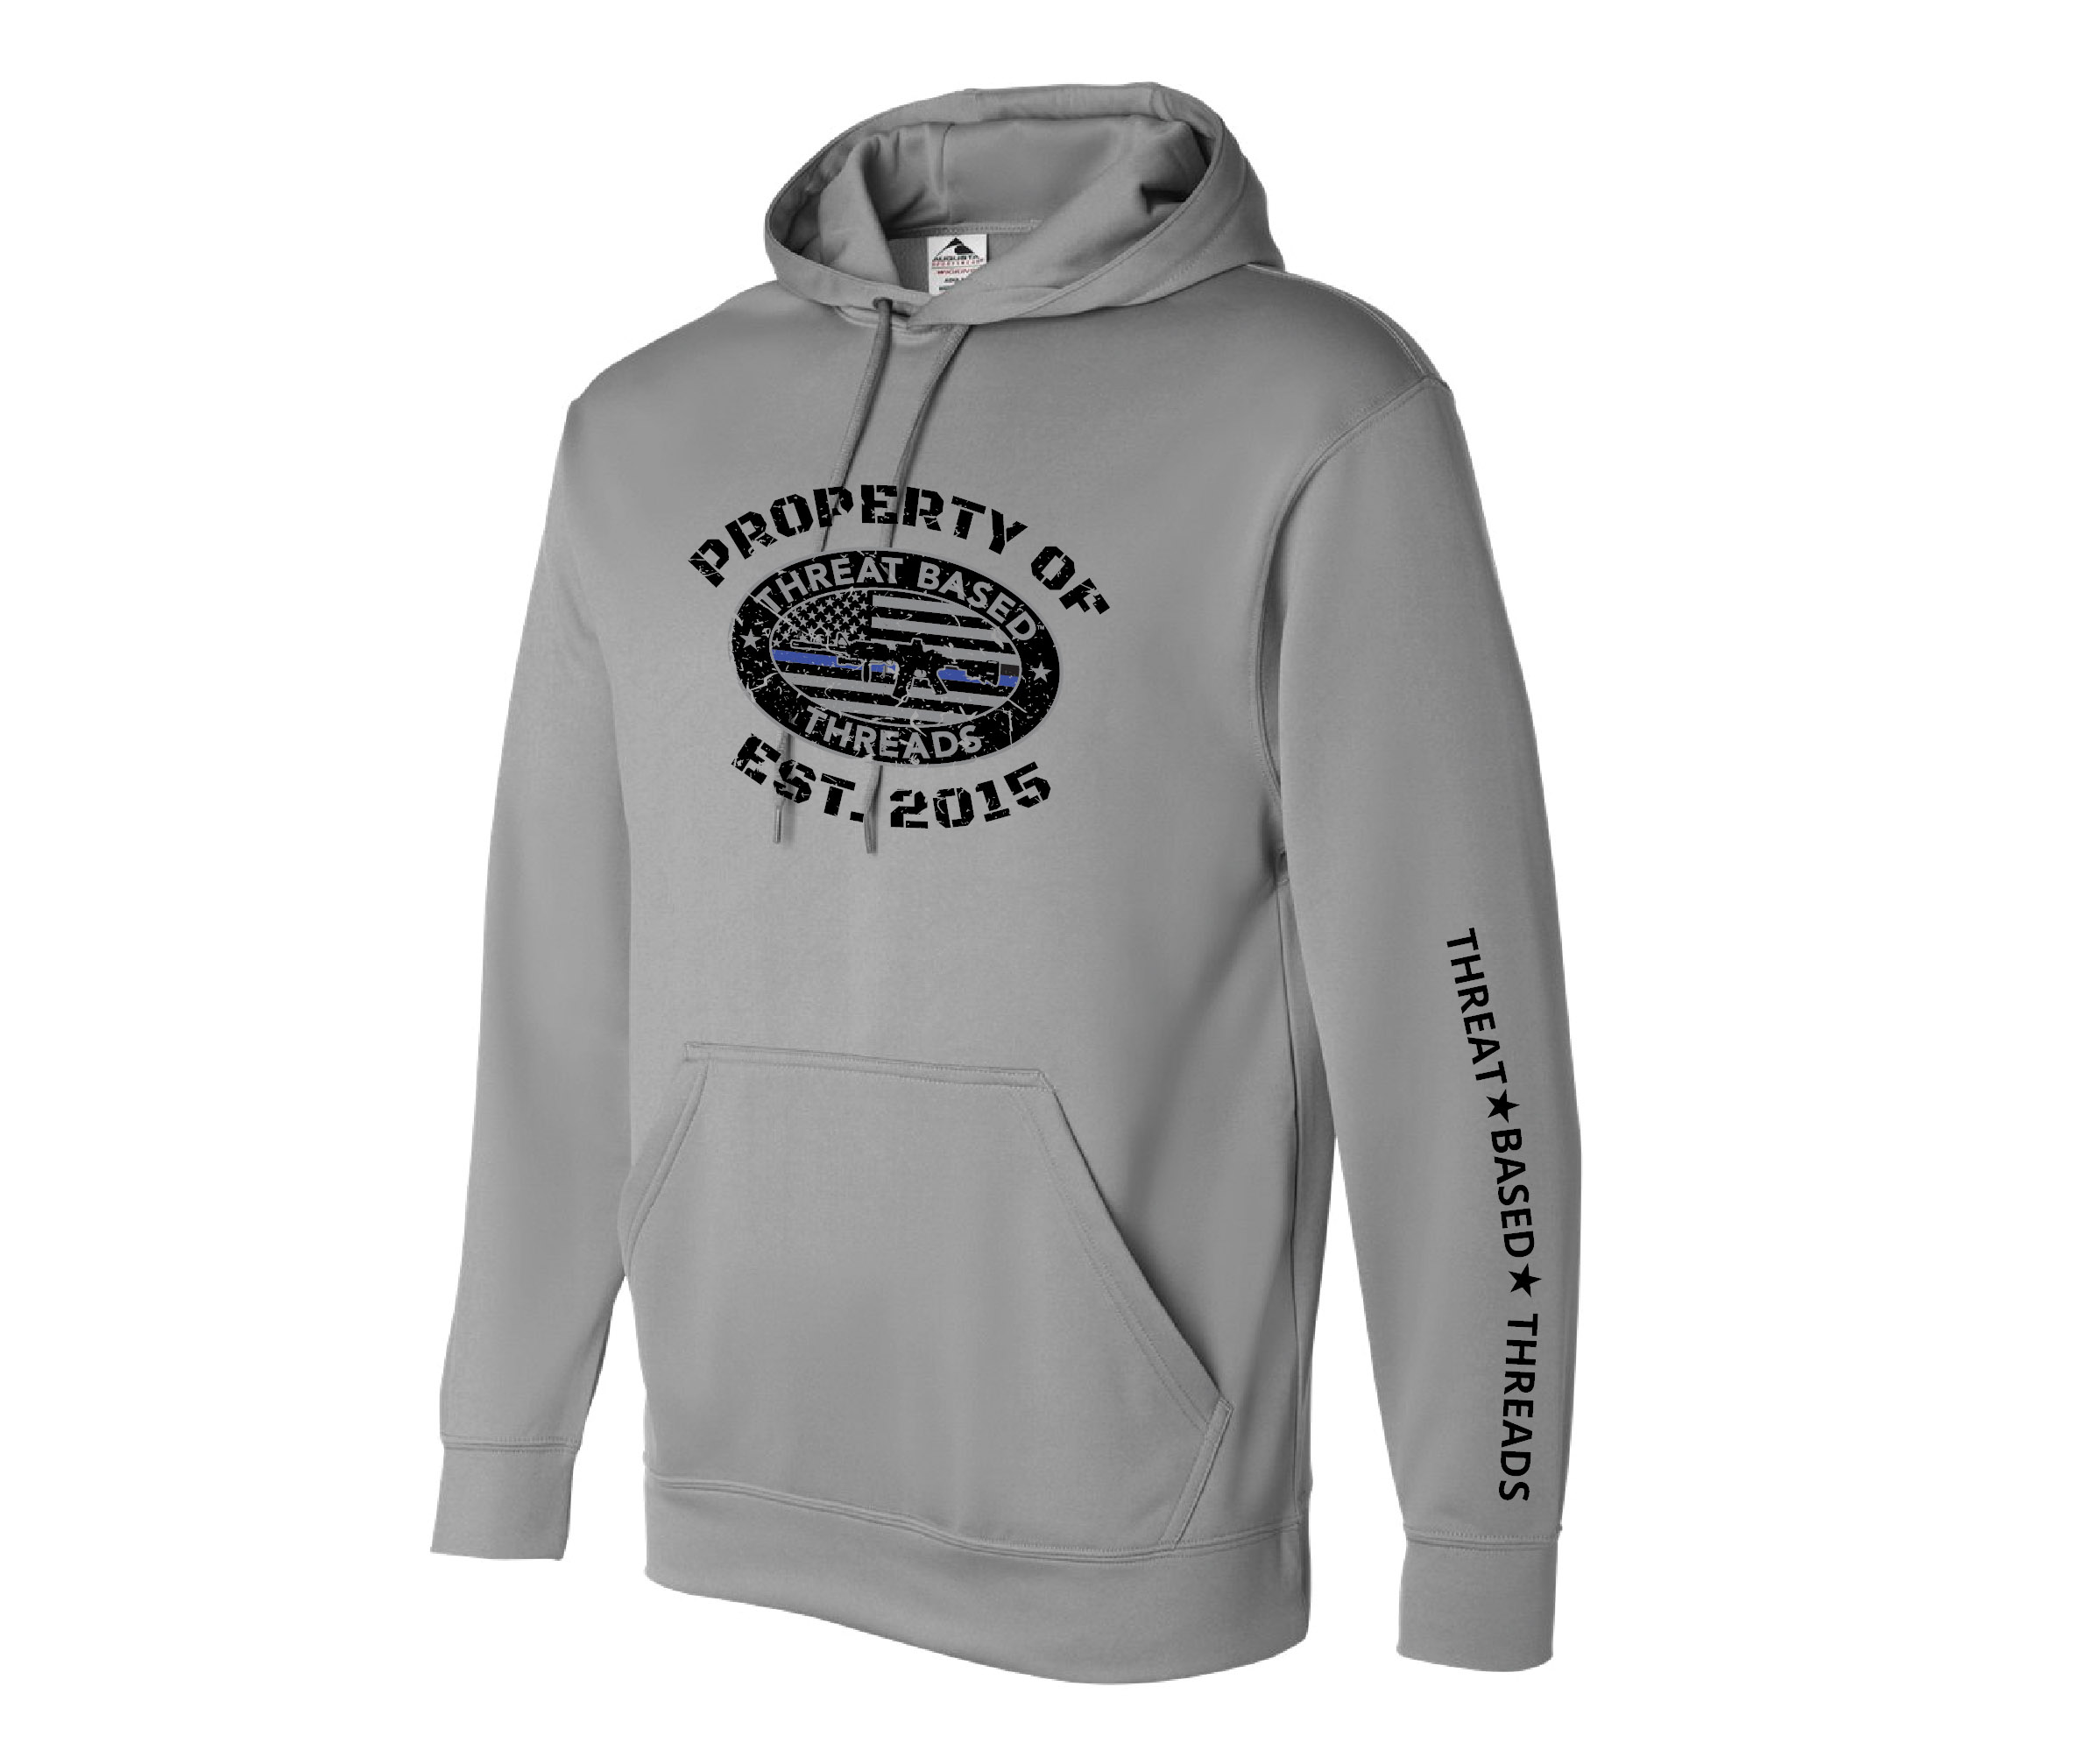 Property Of Threat Based Threads Hoodie – Giving Back